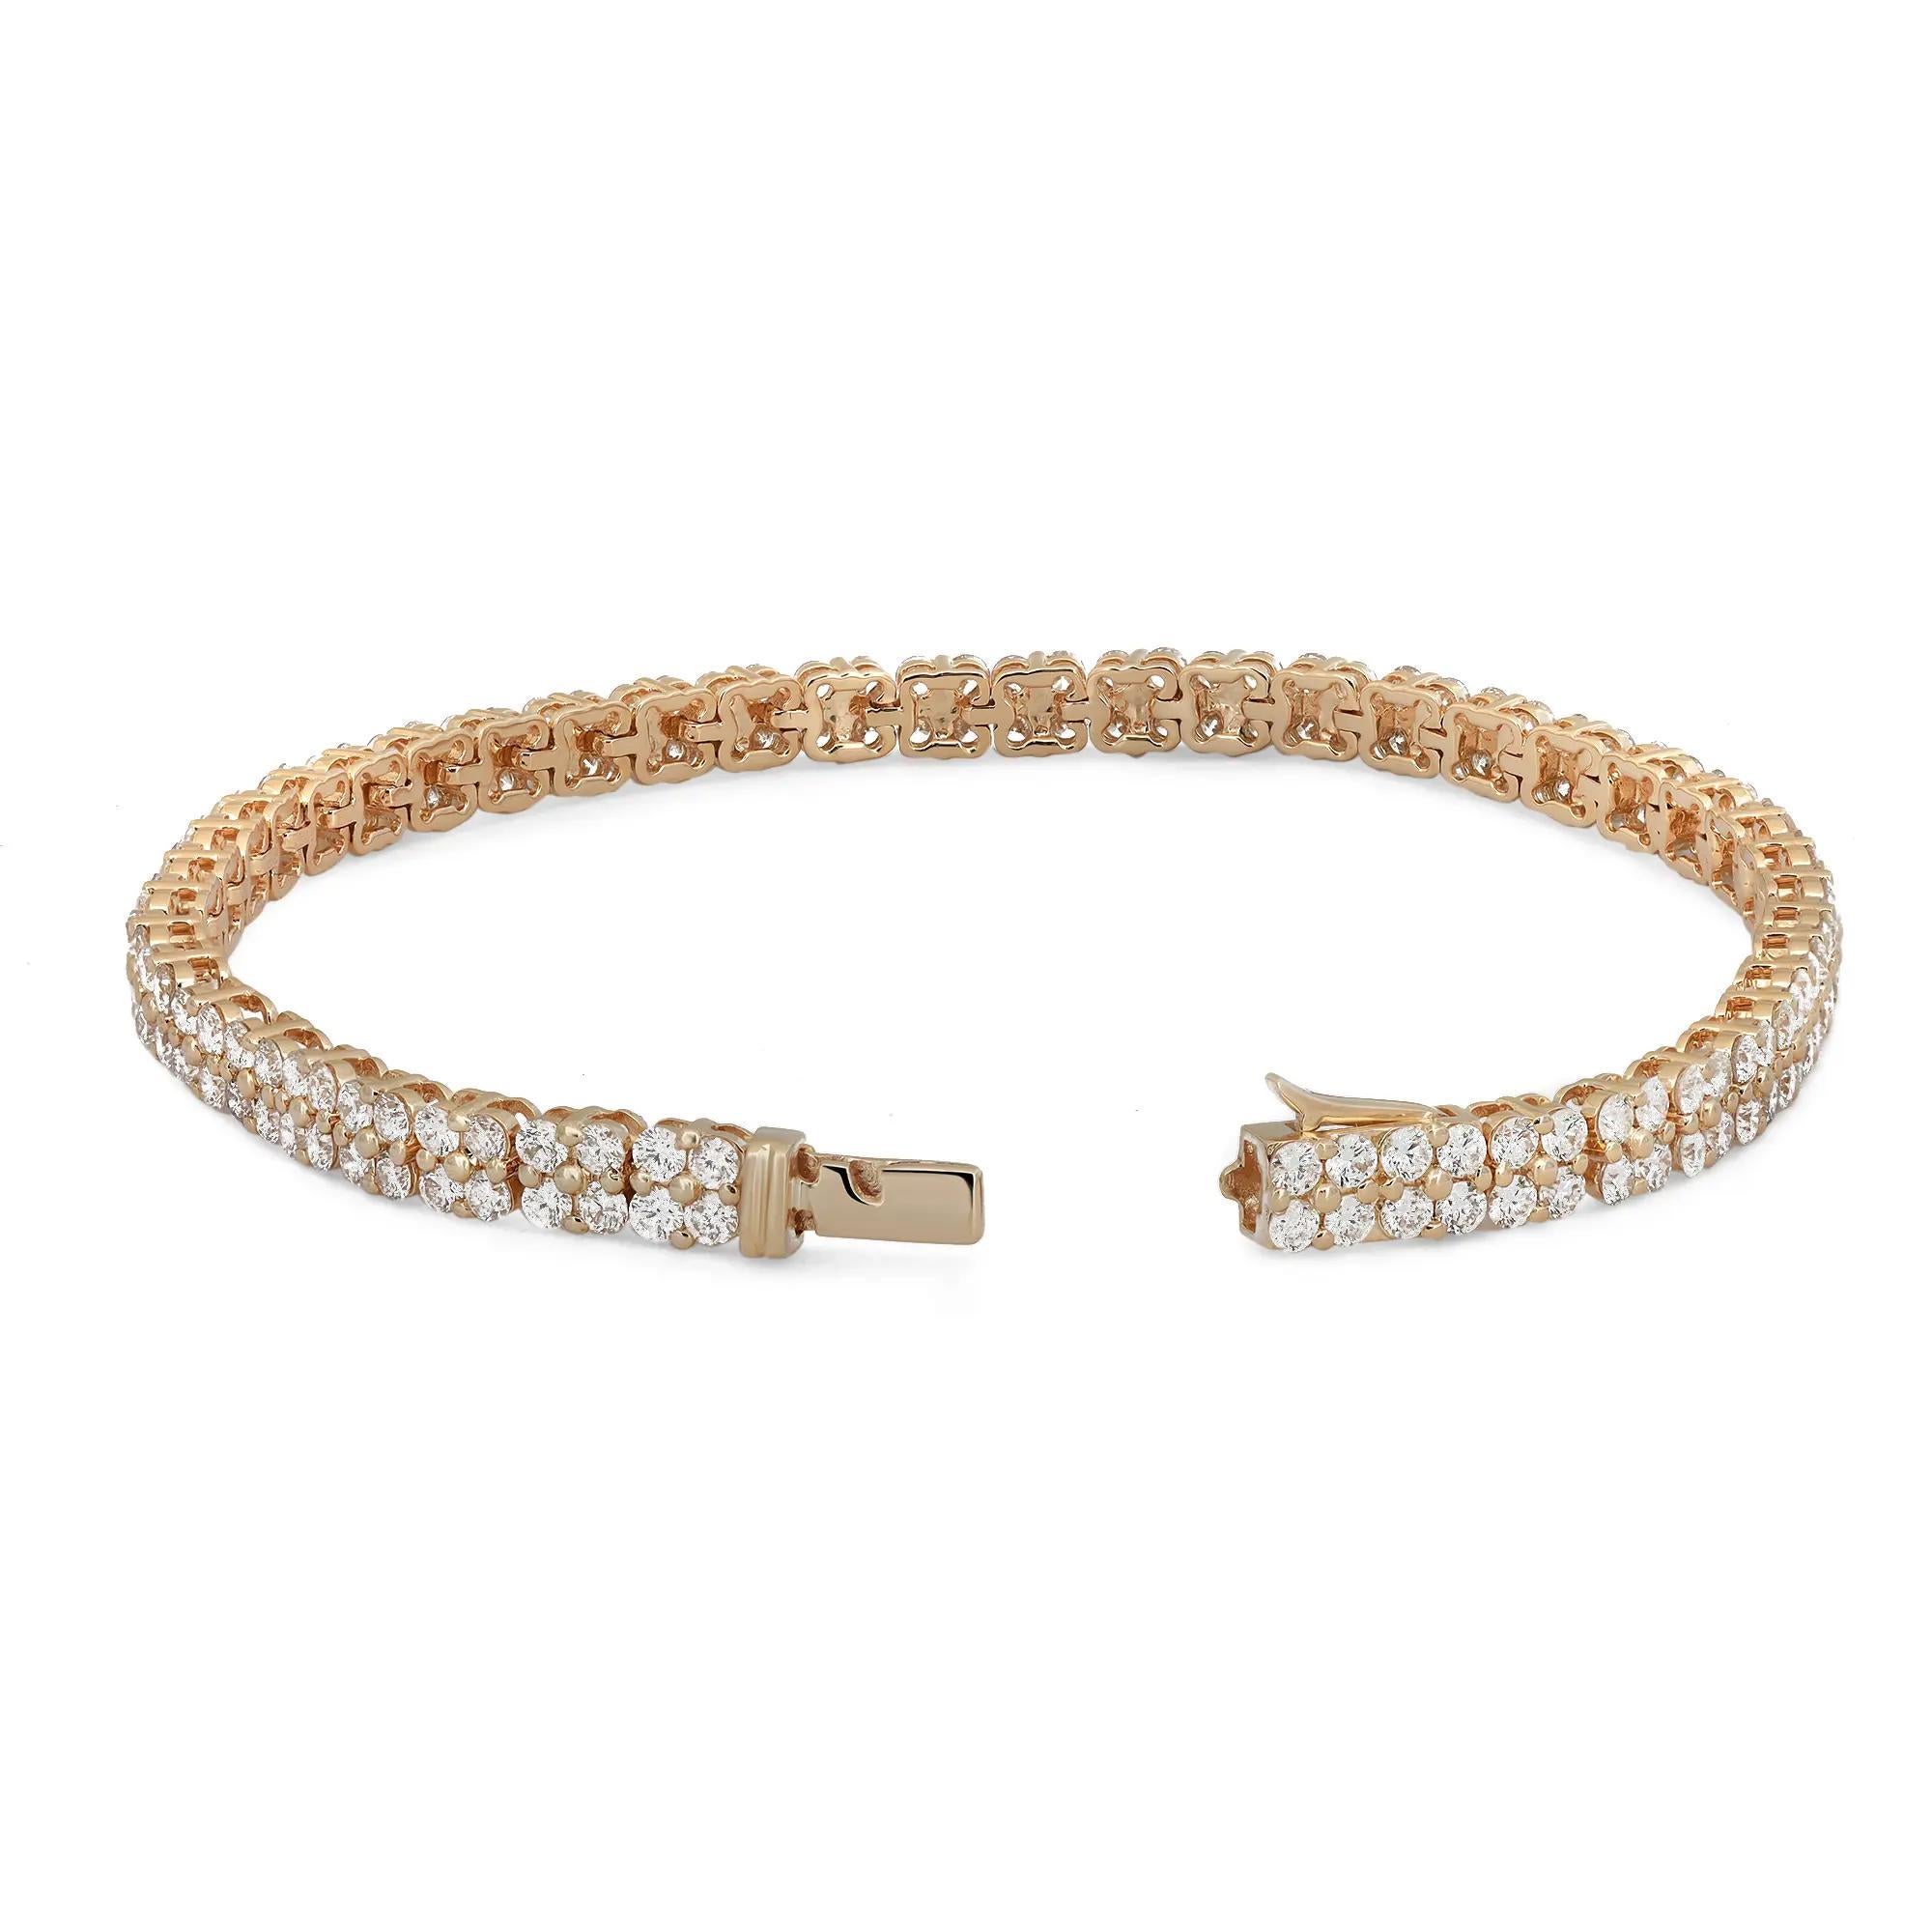 Introducing our 4.60 Carat Diamond Two-Row Bracelet in timeless 18K yellow gold—a hallmark of sophistication and enduring beauty. With a total diamond weight of 4.60 carats, the meticulously selected diamonds showcase exceptional cut, color,